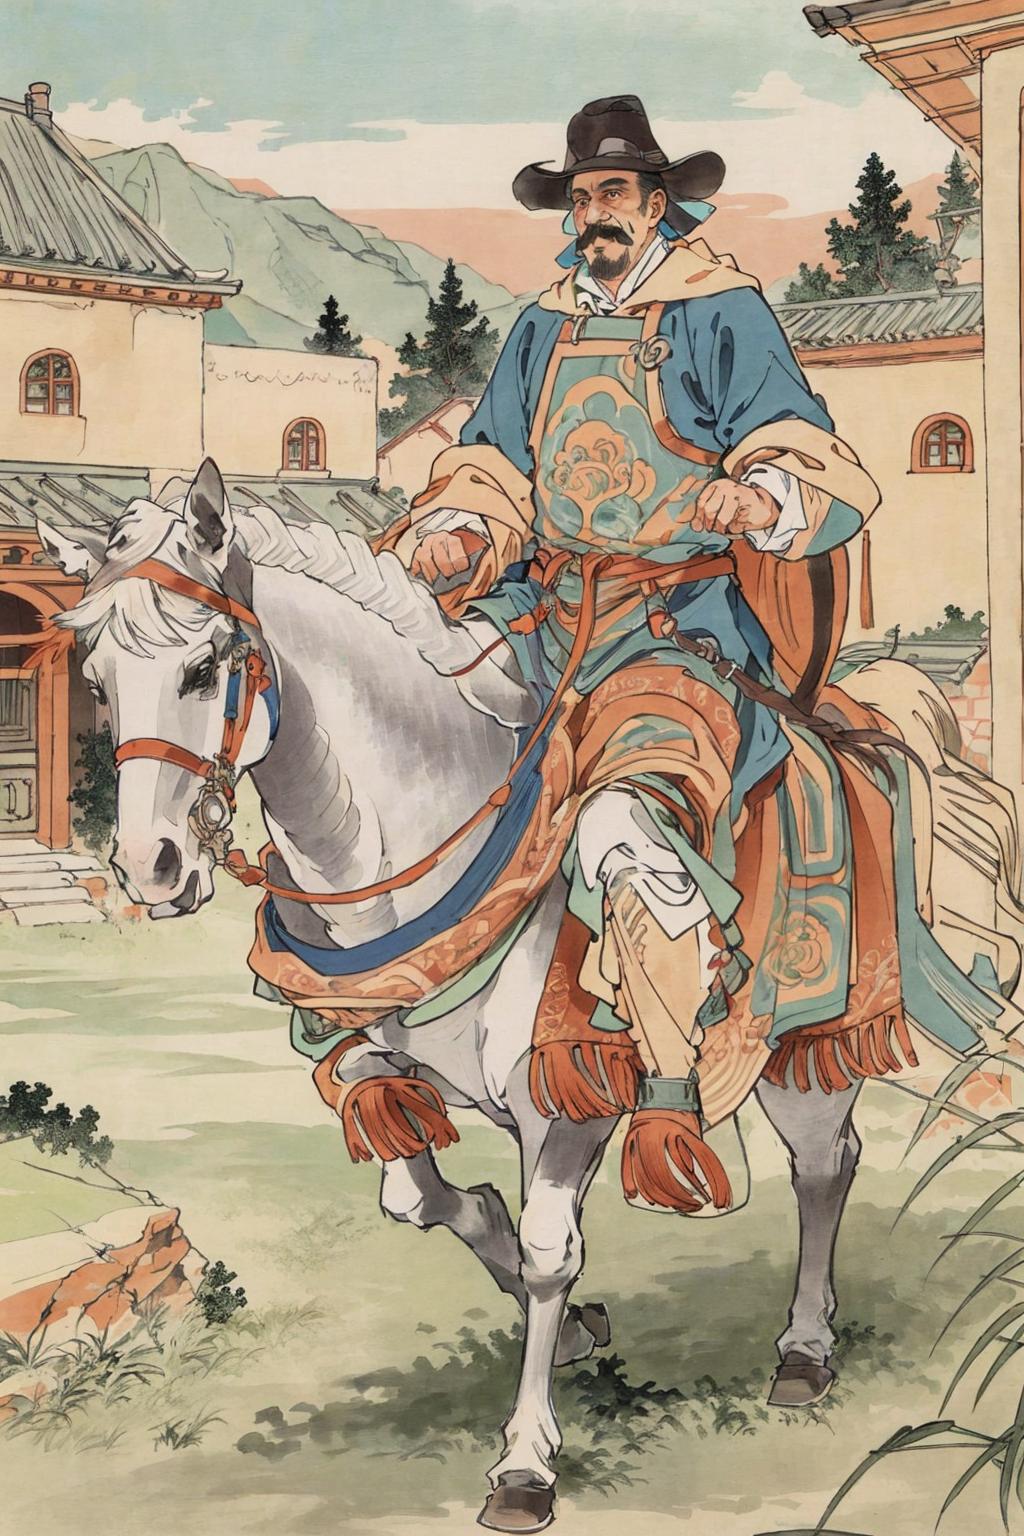 A man in a blue robe riding on the back of a white horse.